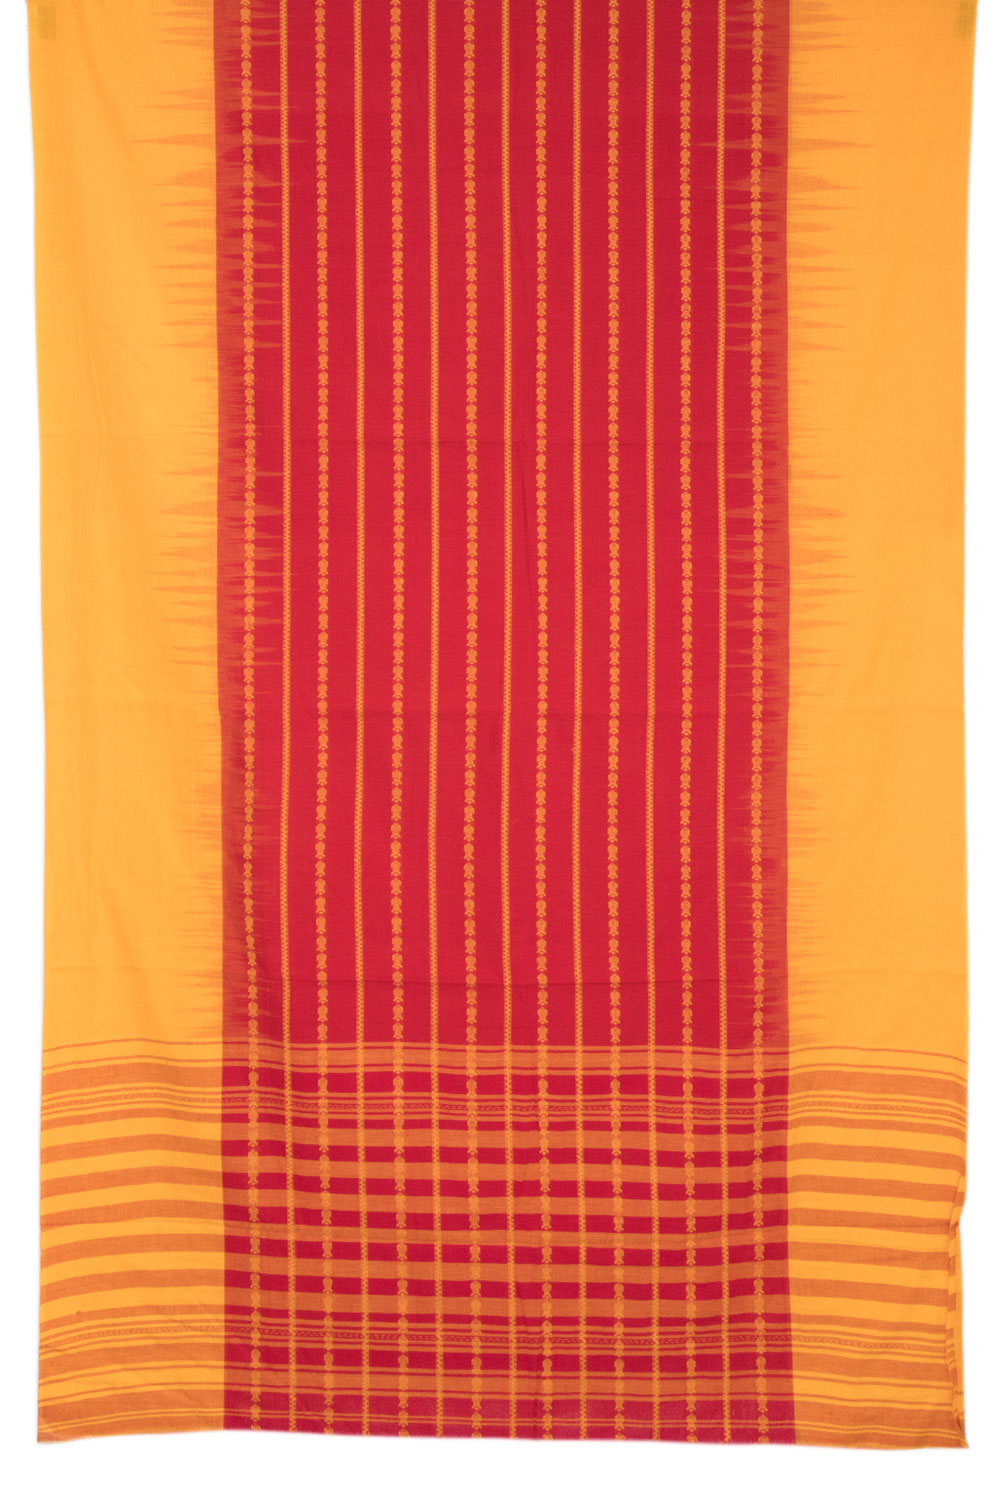 Red with Yellow Handloom Dhaniakhali Cotton Saree - 10063562